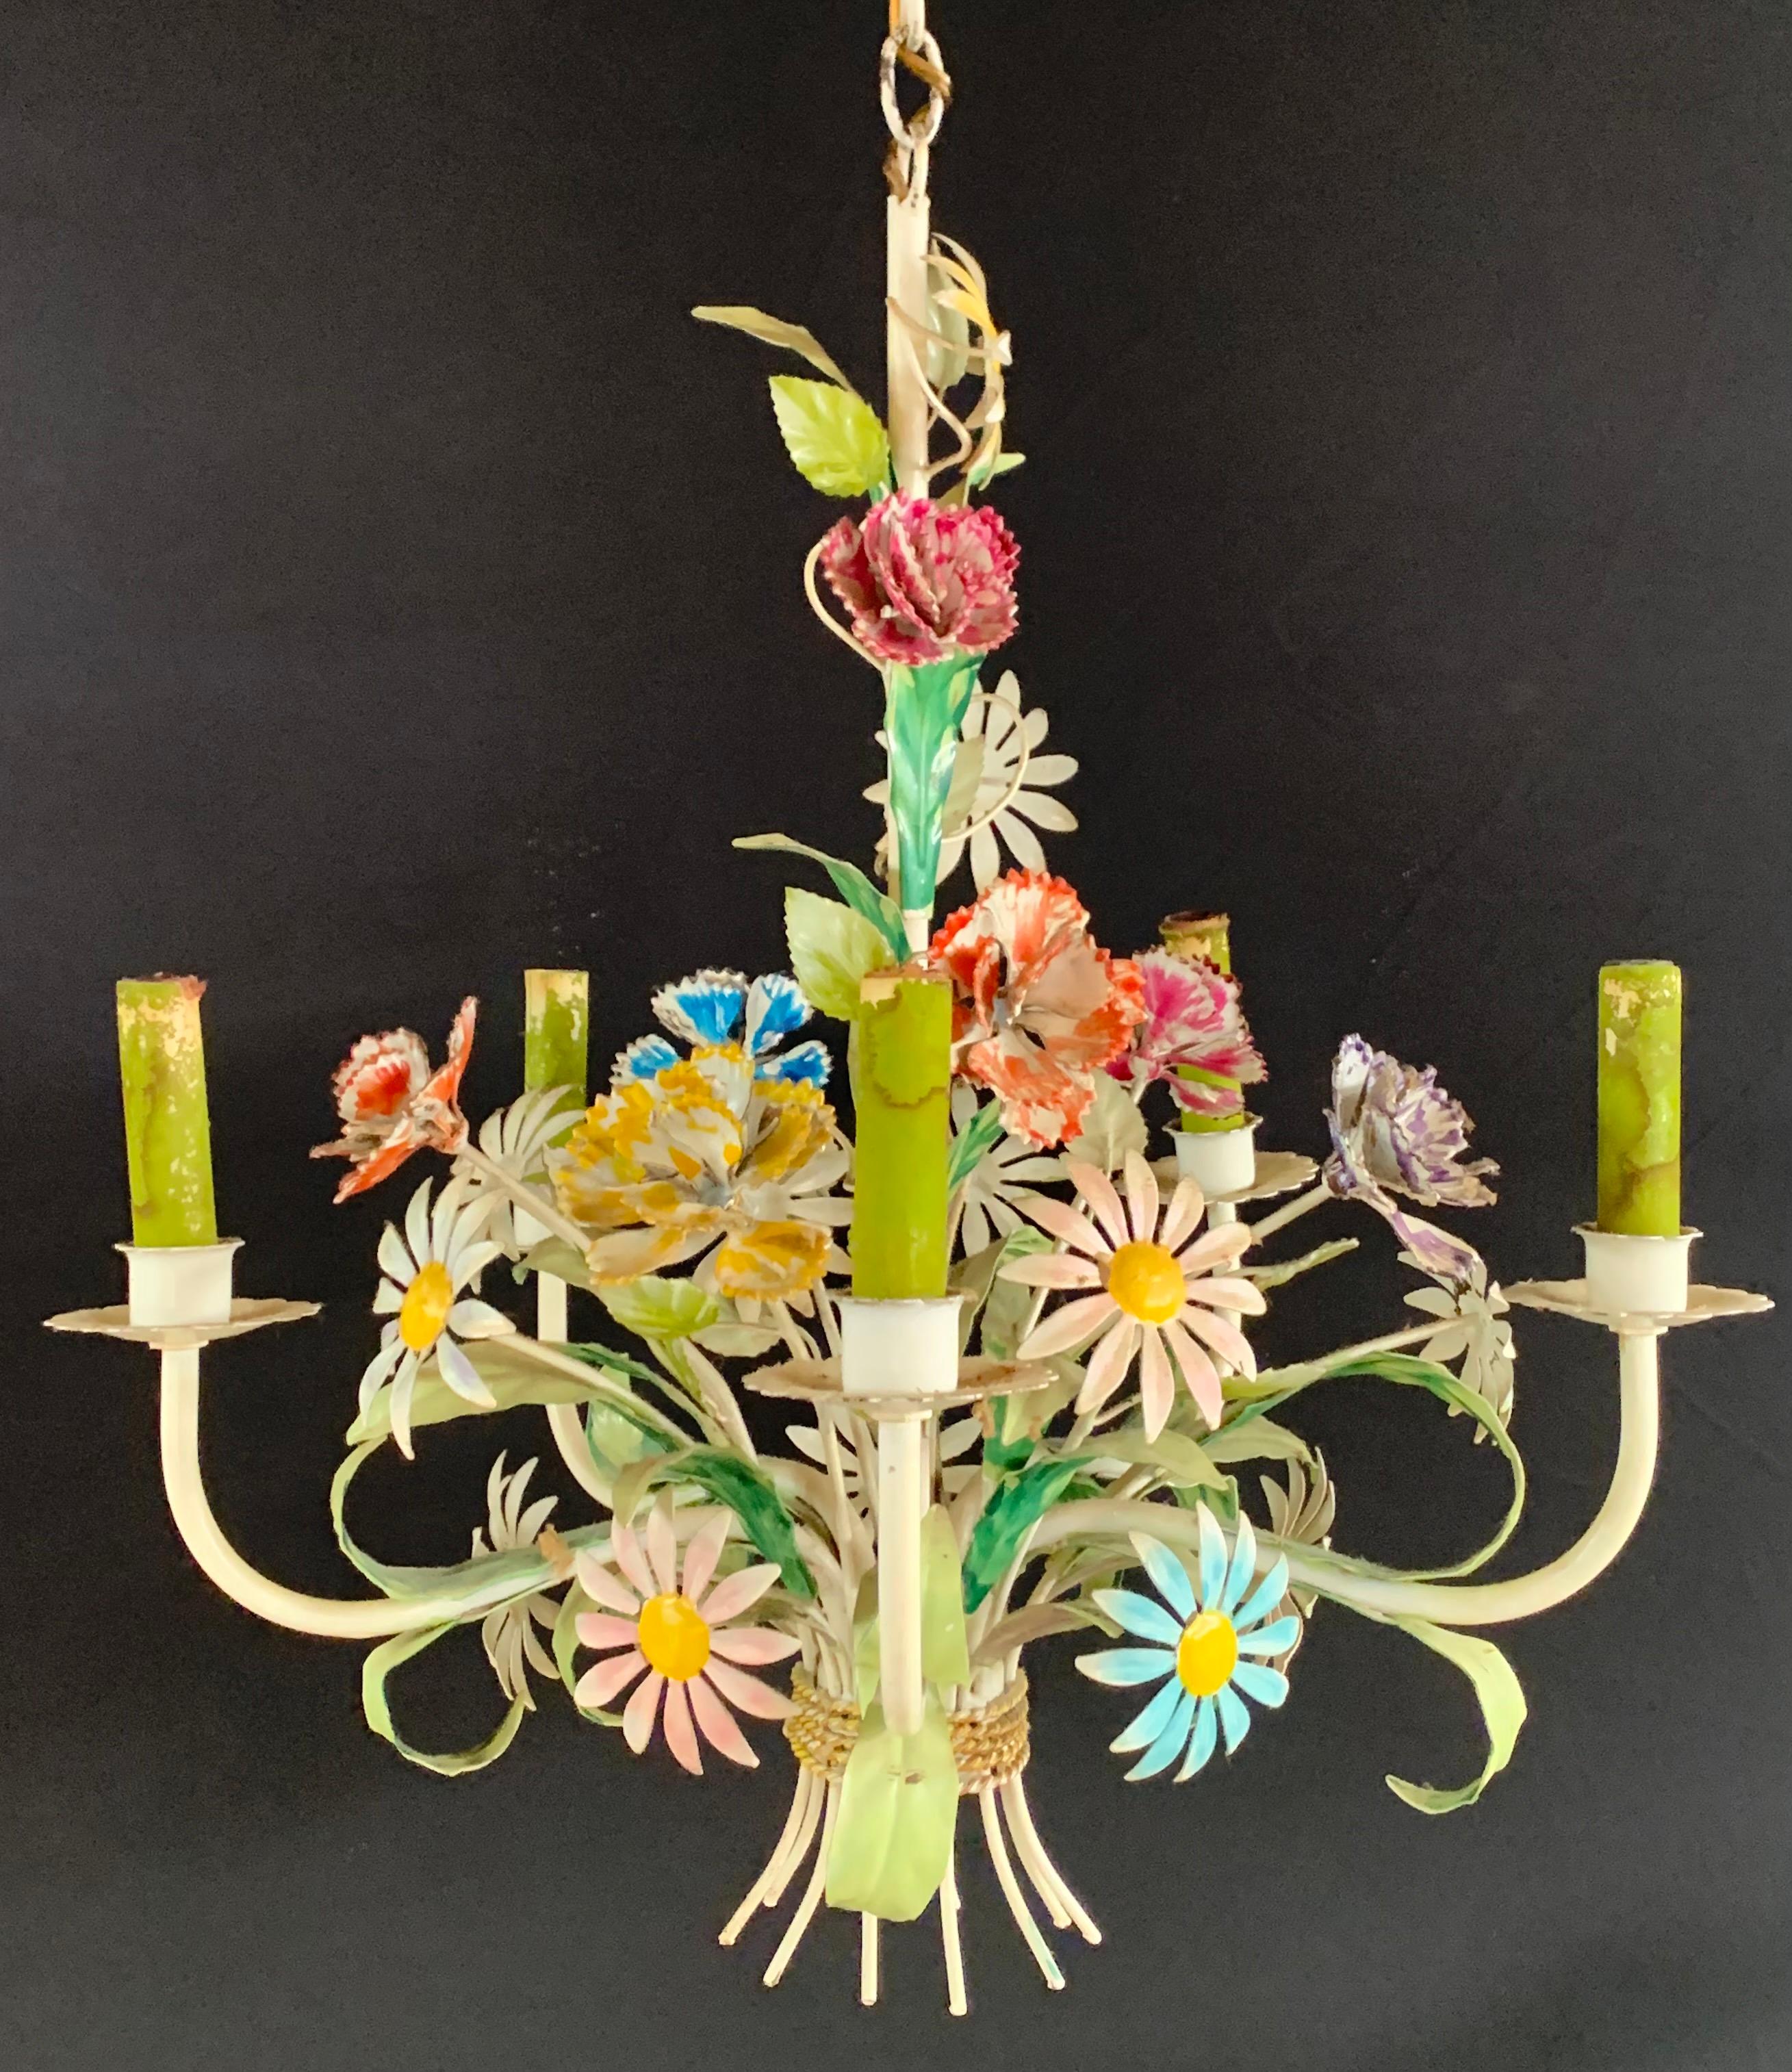 A stylish boho chic Italian tole metal flower chandelier. The hand tooled chandelier features multi-color flowers and roses in a form of a beautifully arranged bouquet , all hand painted in pastel cheerful spring colors. The chandelier has 4 arms